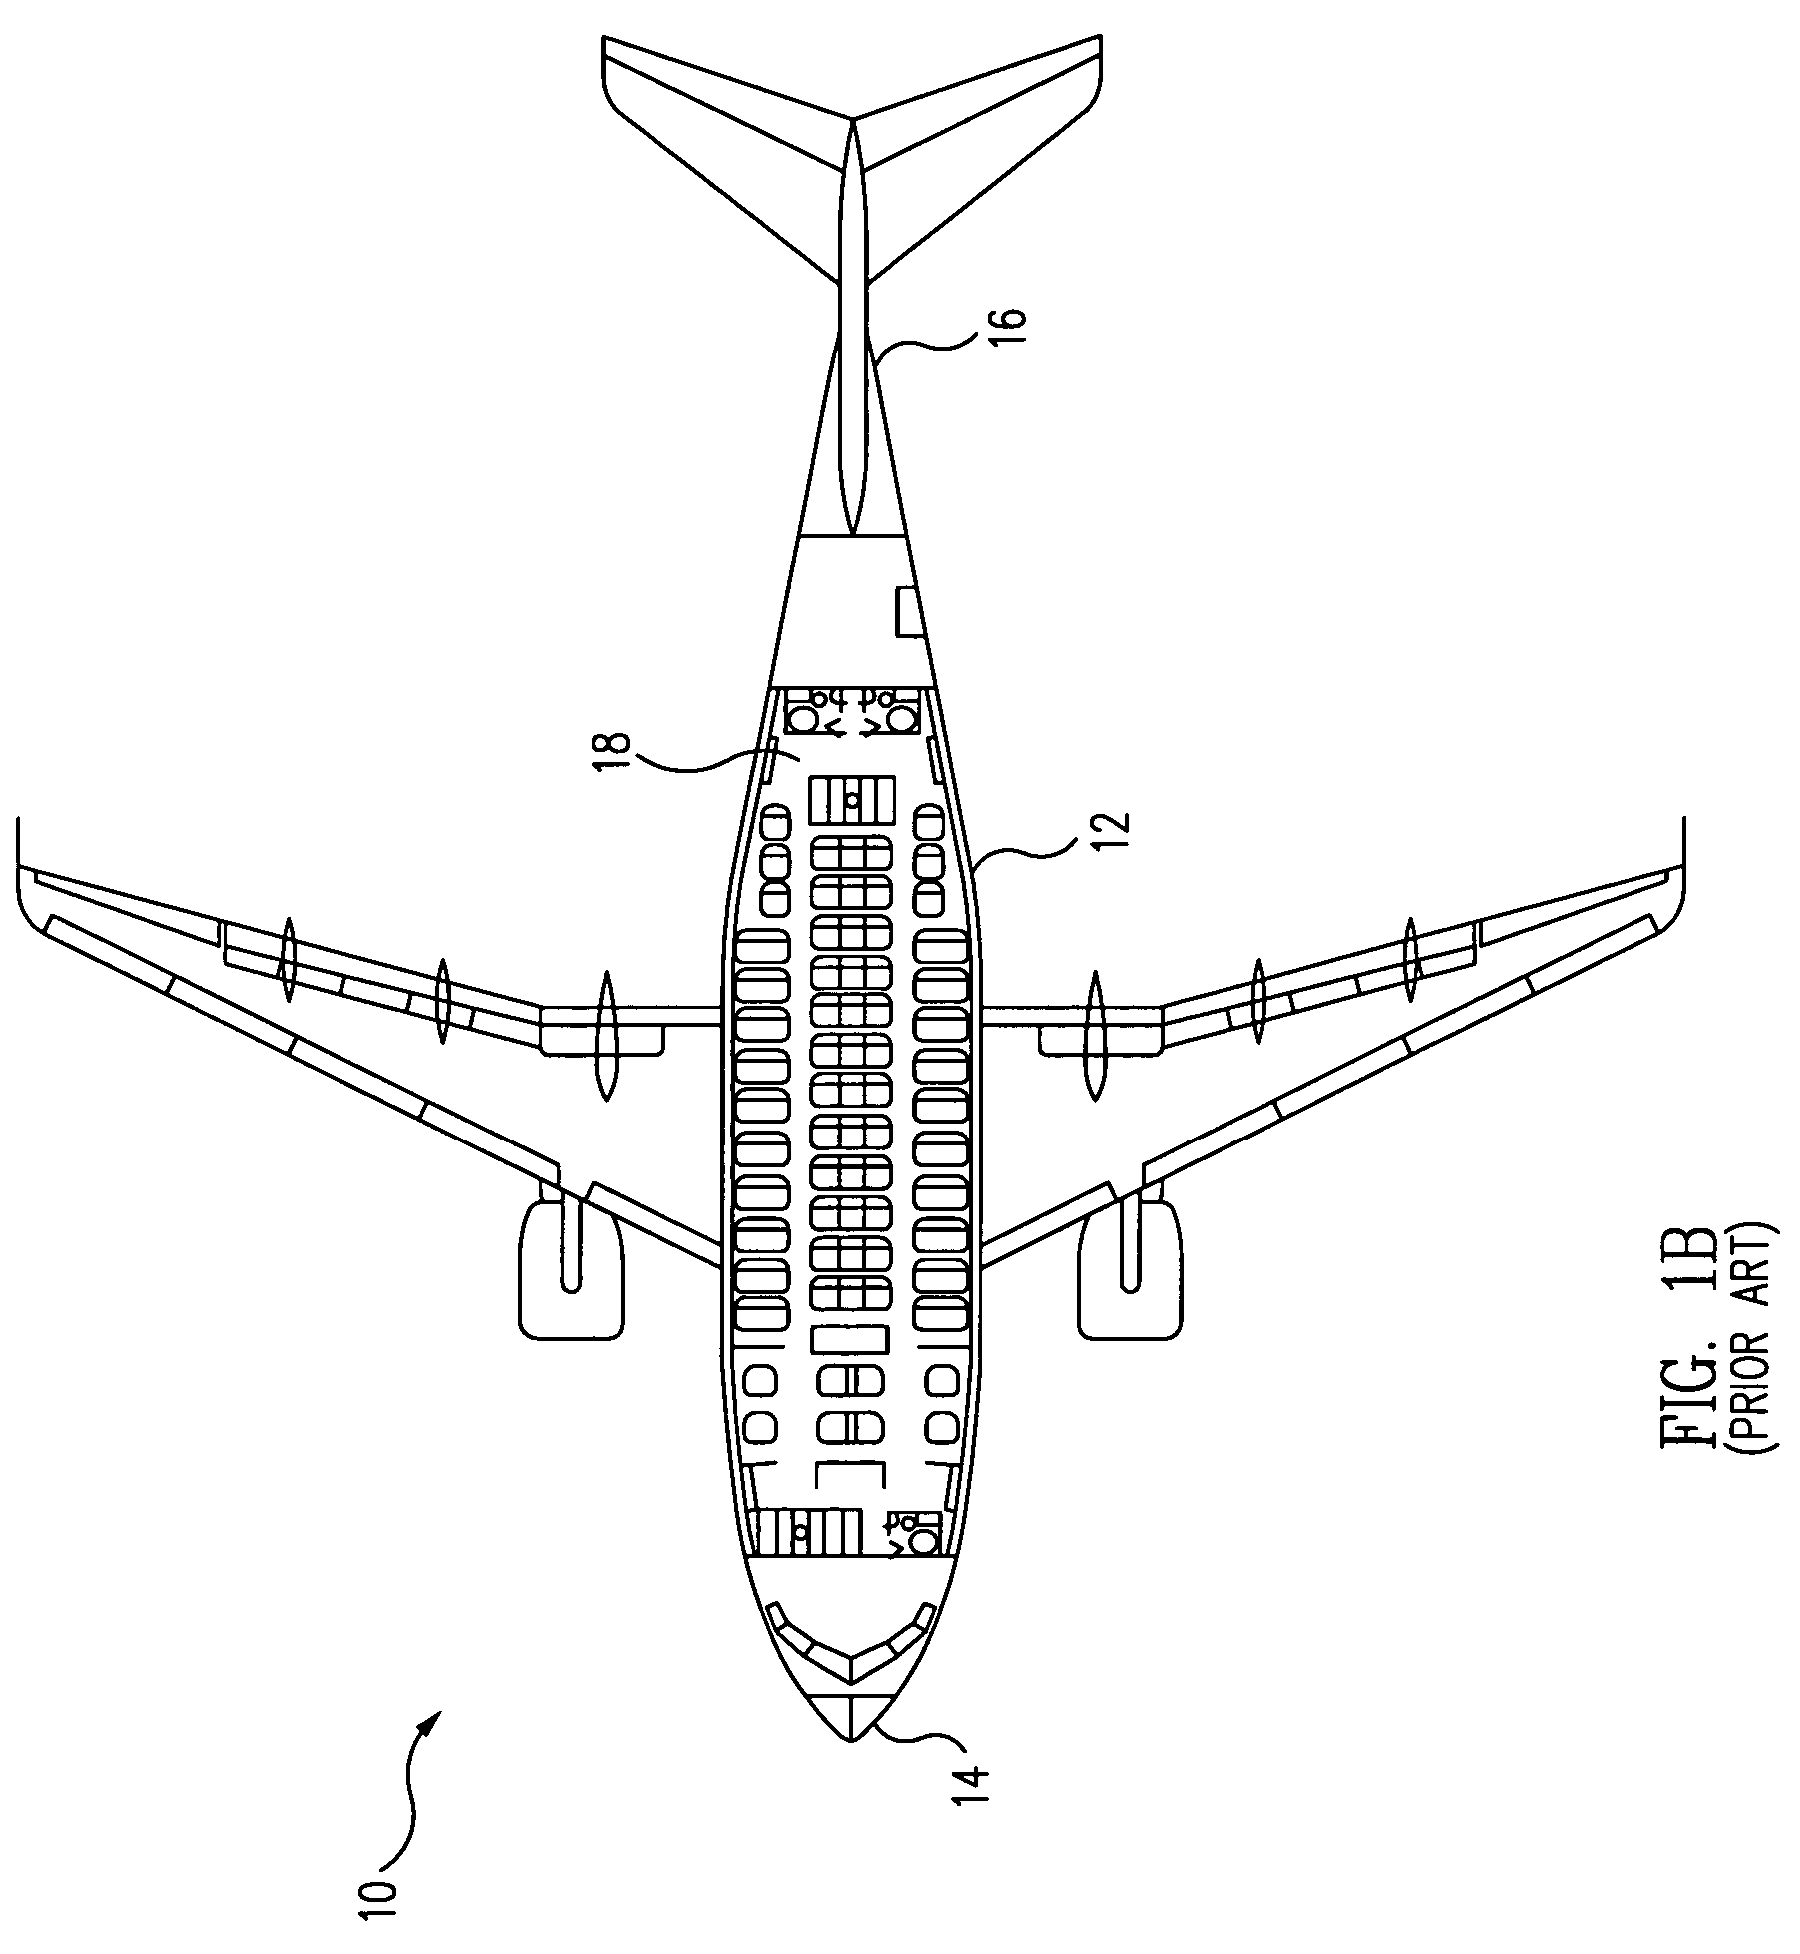 Weight optimized pressurizable aircraft fuselage structures having near elliptical cross sections